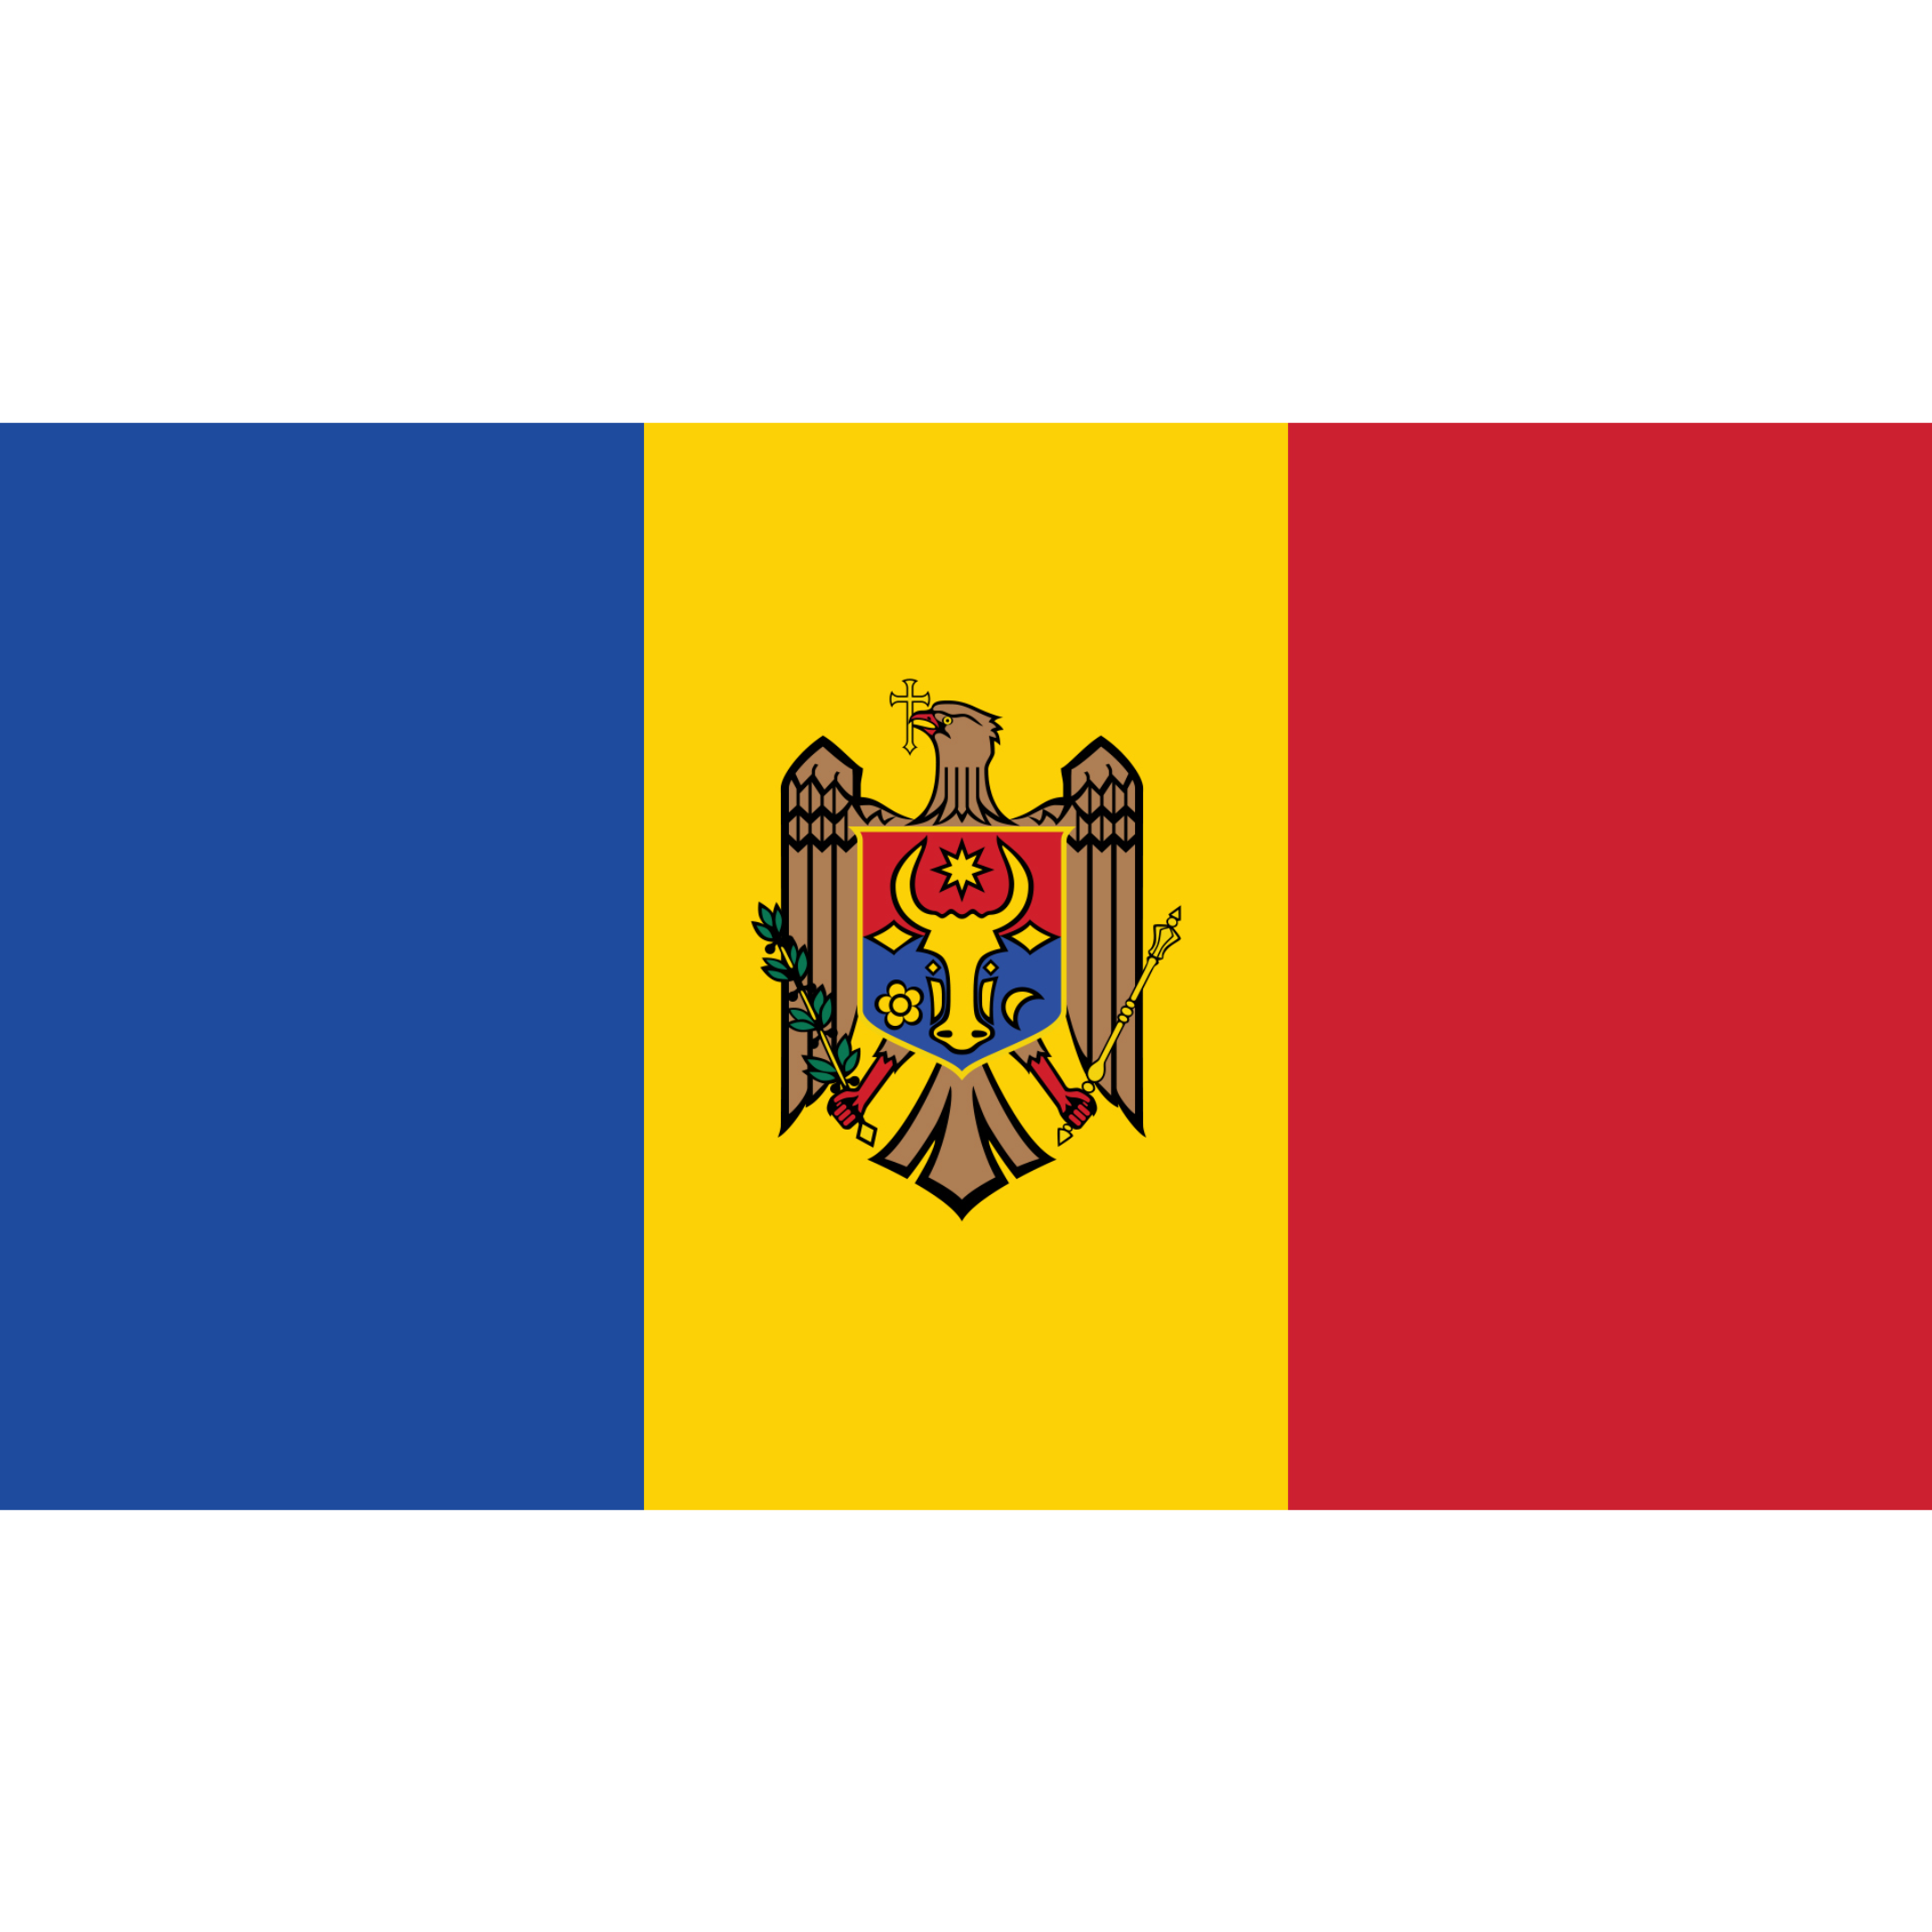 The flag of Moldova has 3 vertical bands in blue, yellow and red with the coat of arms of Moldova in the centre.